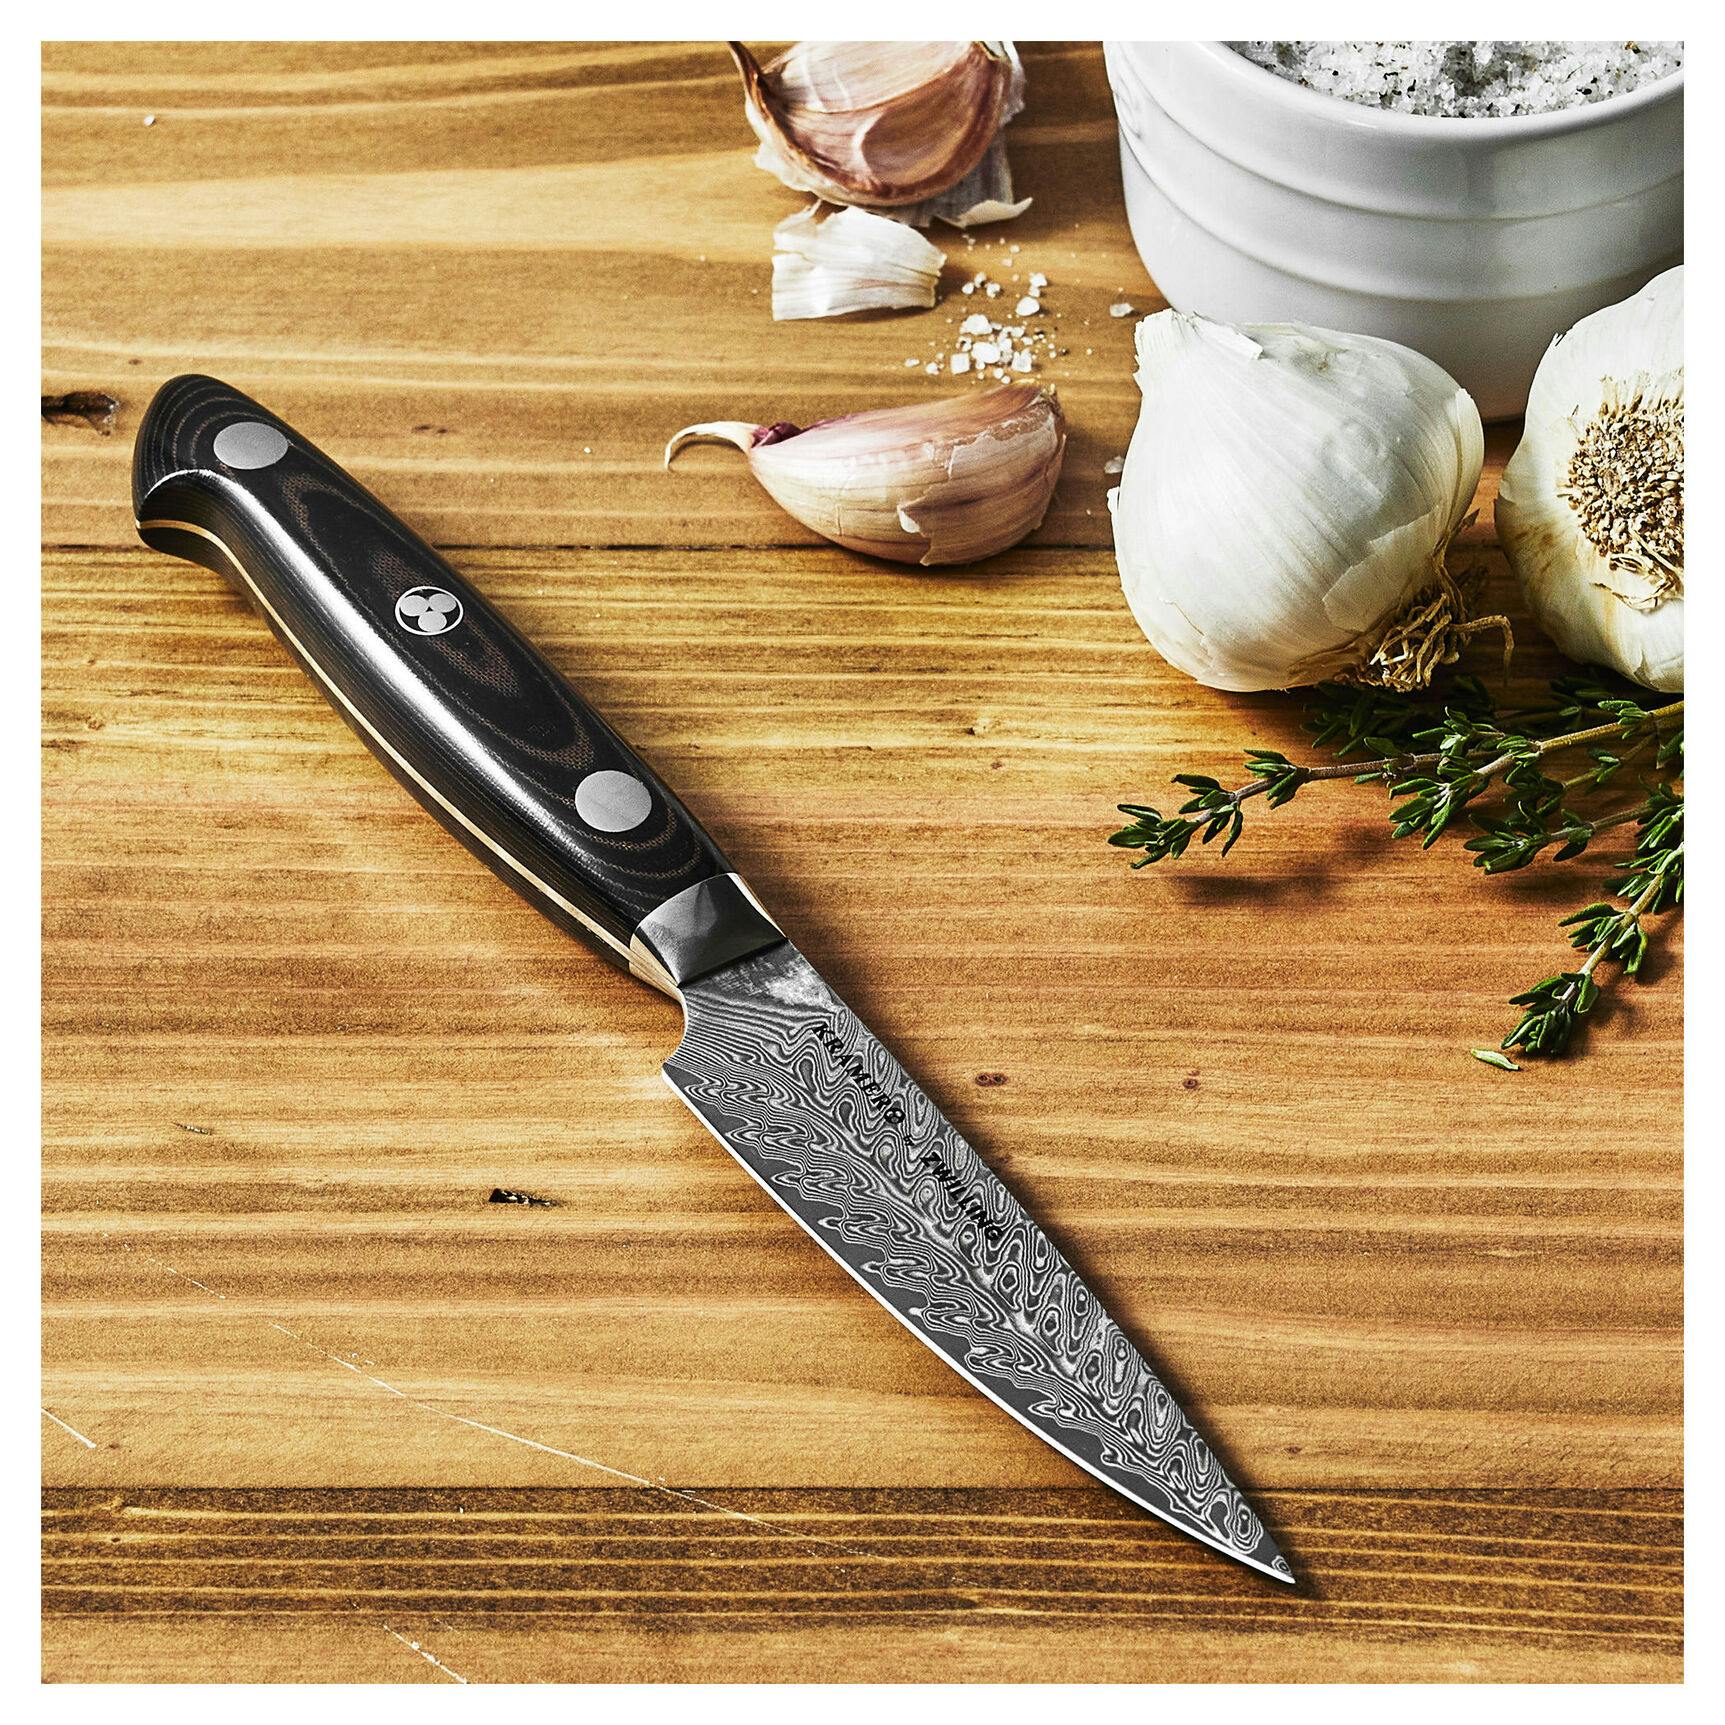 KRAMER by ZWILLING EUROLINE Damascus Collection 8-inch Narrow Chef's Knife